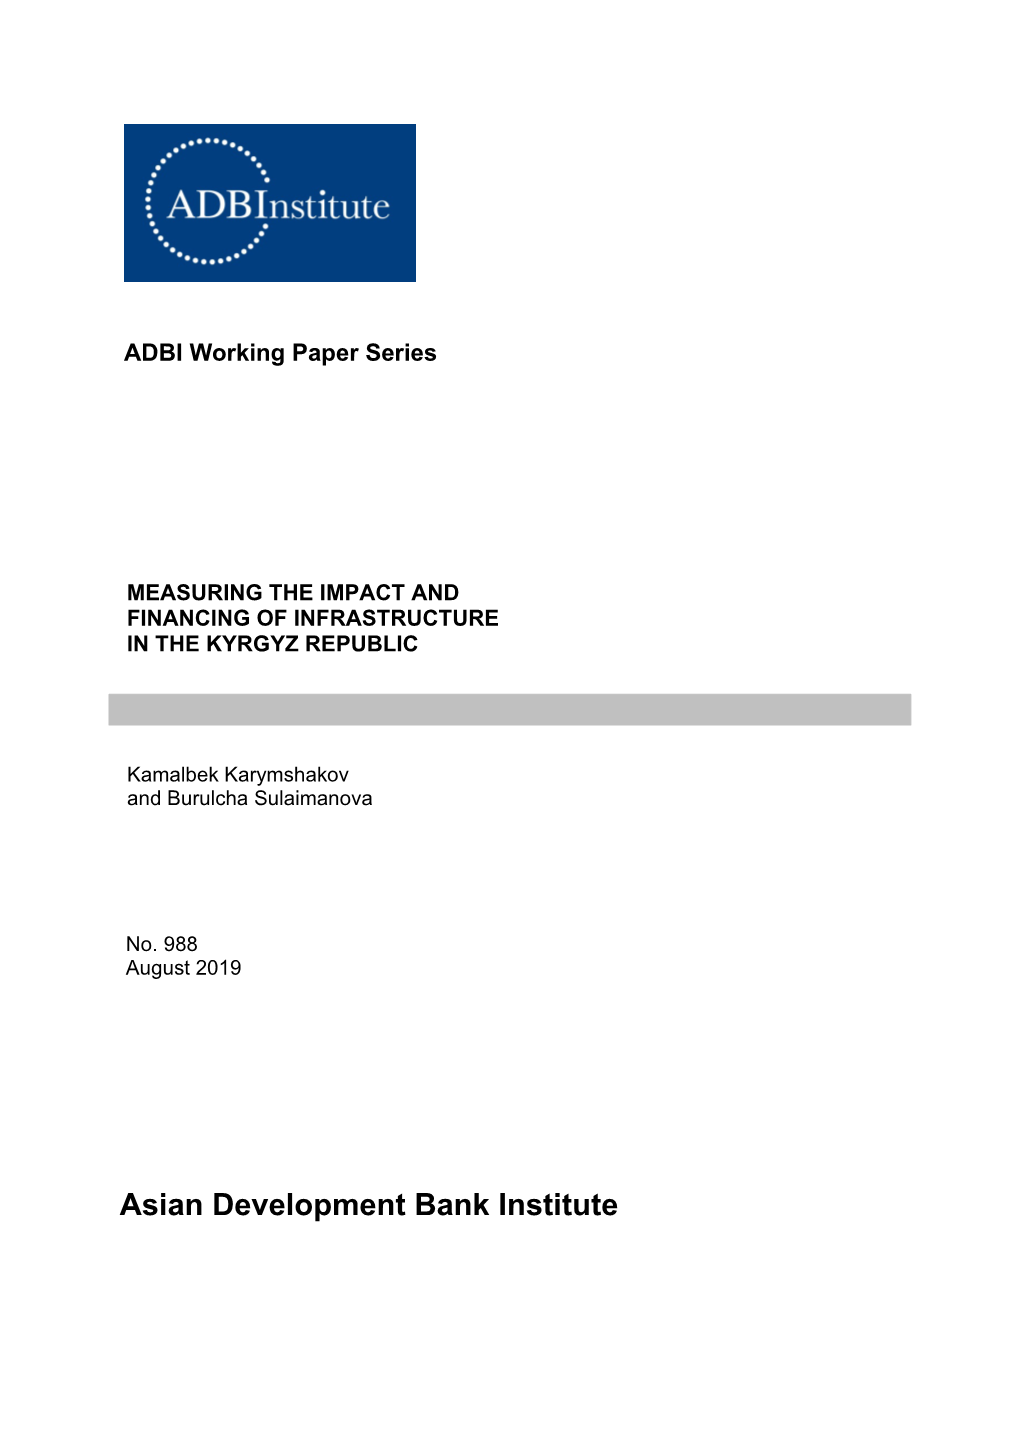 Measuring the Impact and Financing of Infrastructure in the Kyrgyz Republic